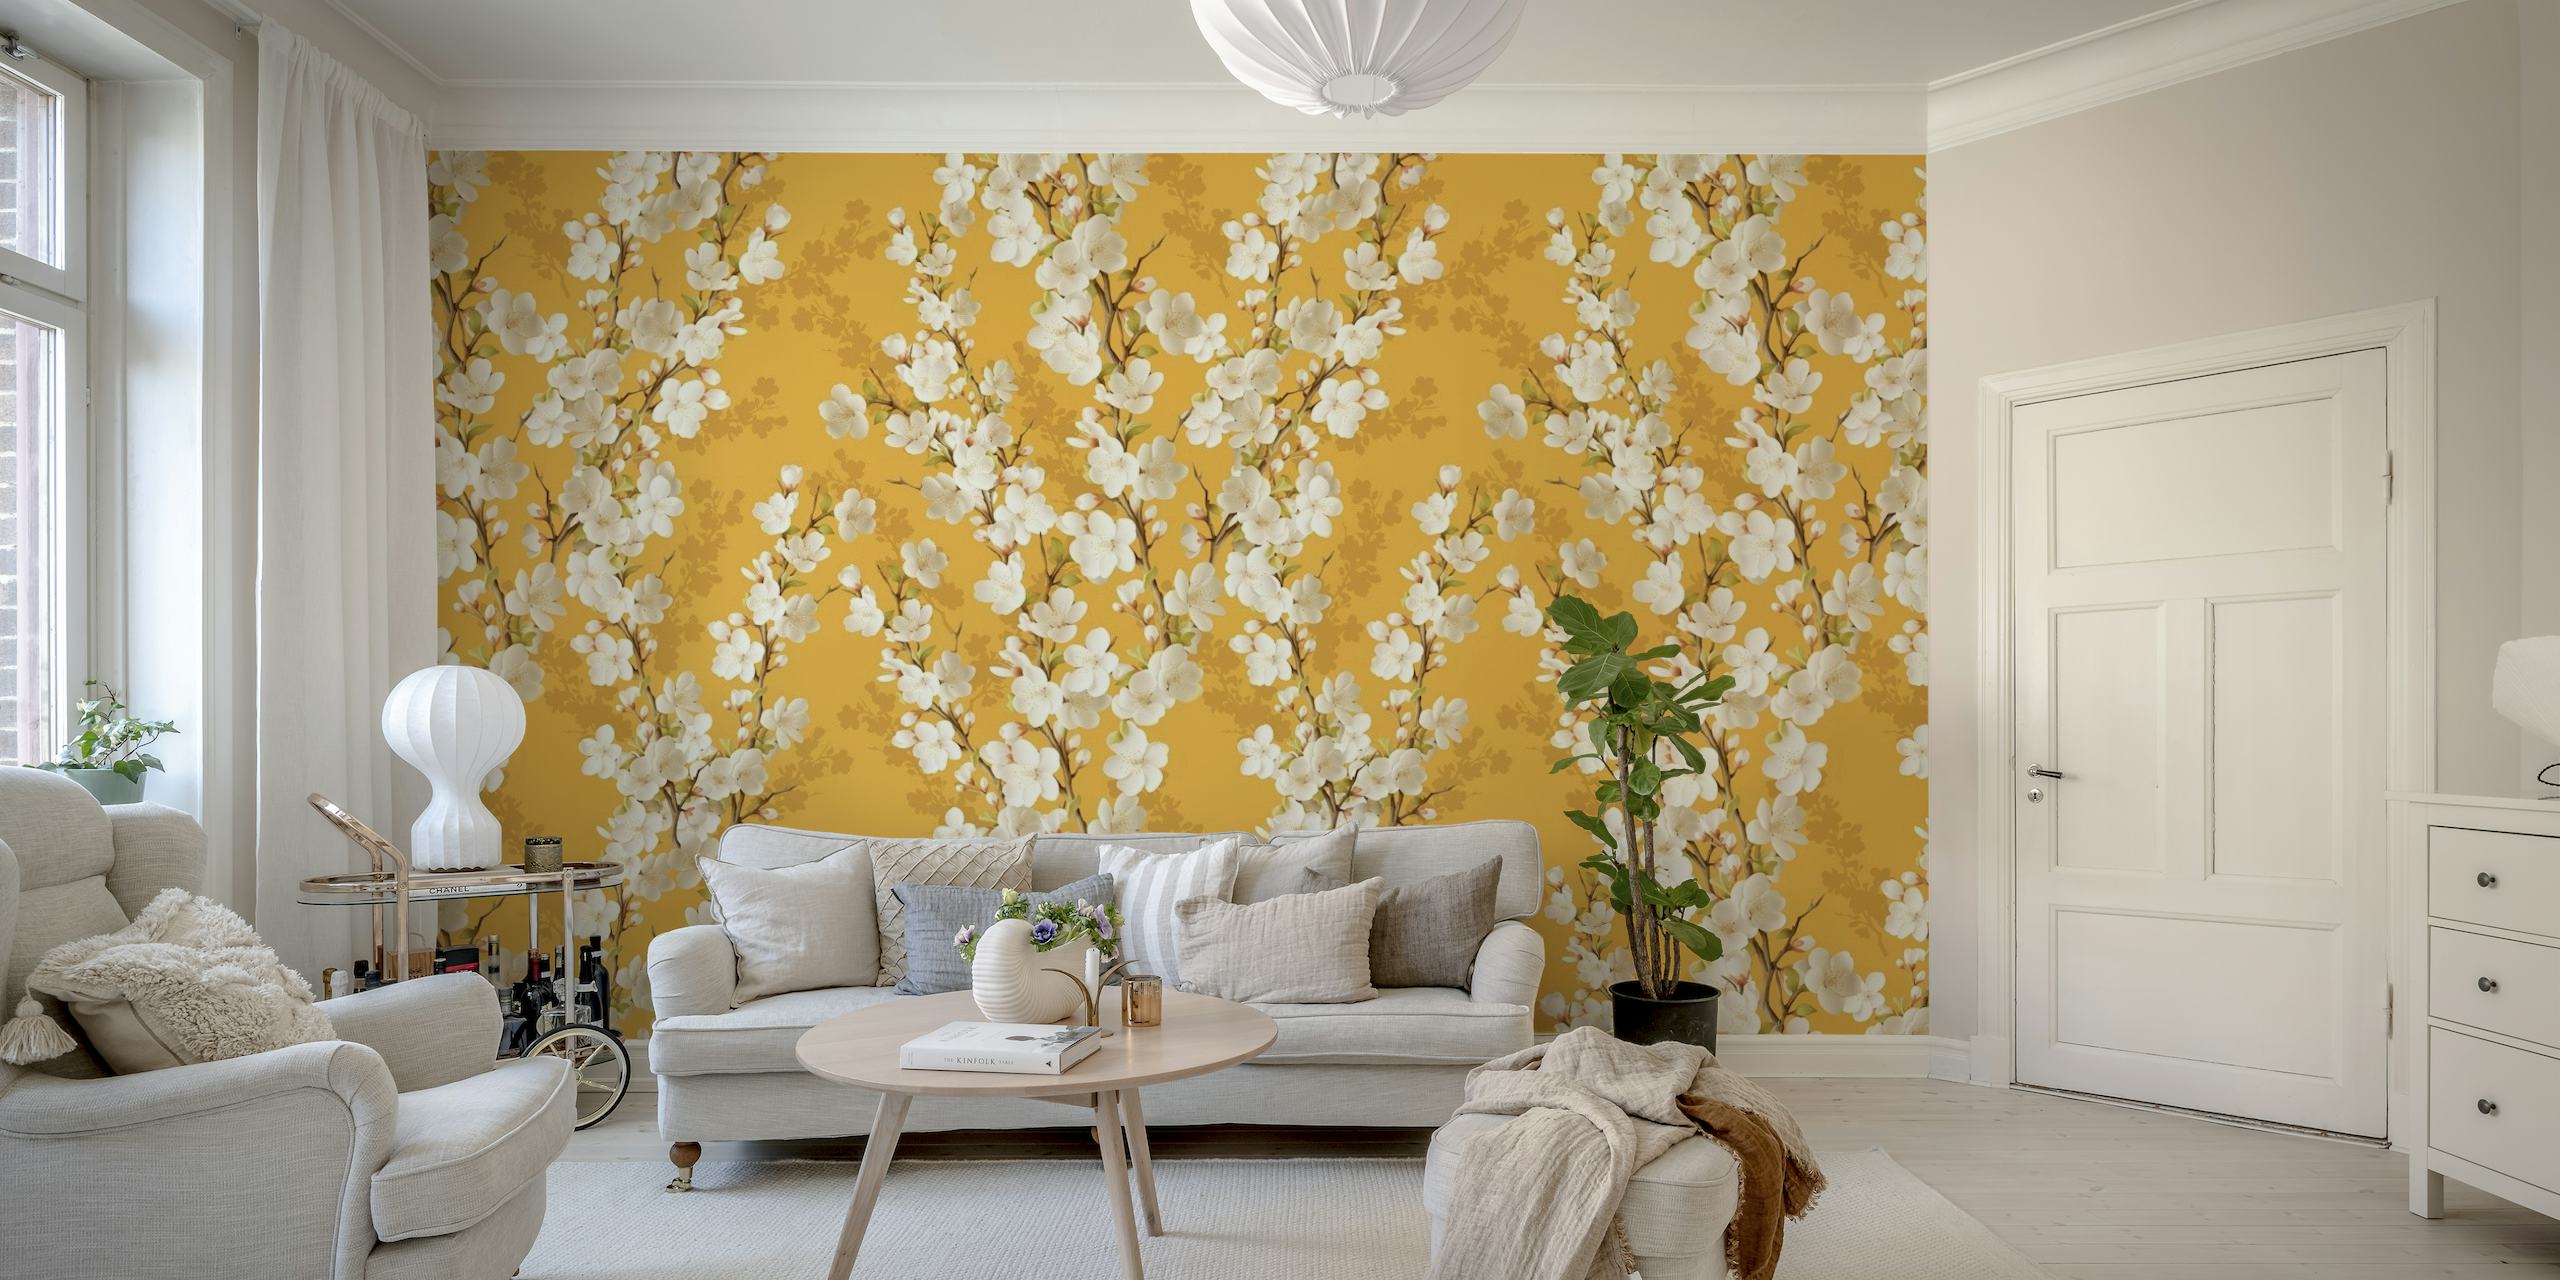 Cherry blossom indian yellow MURAL scale a tapeta